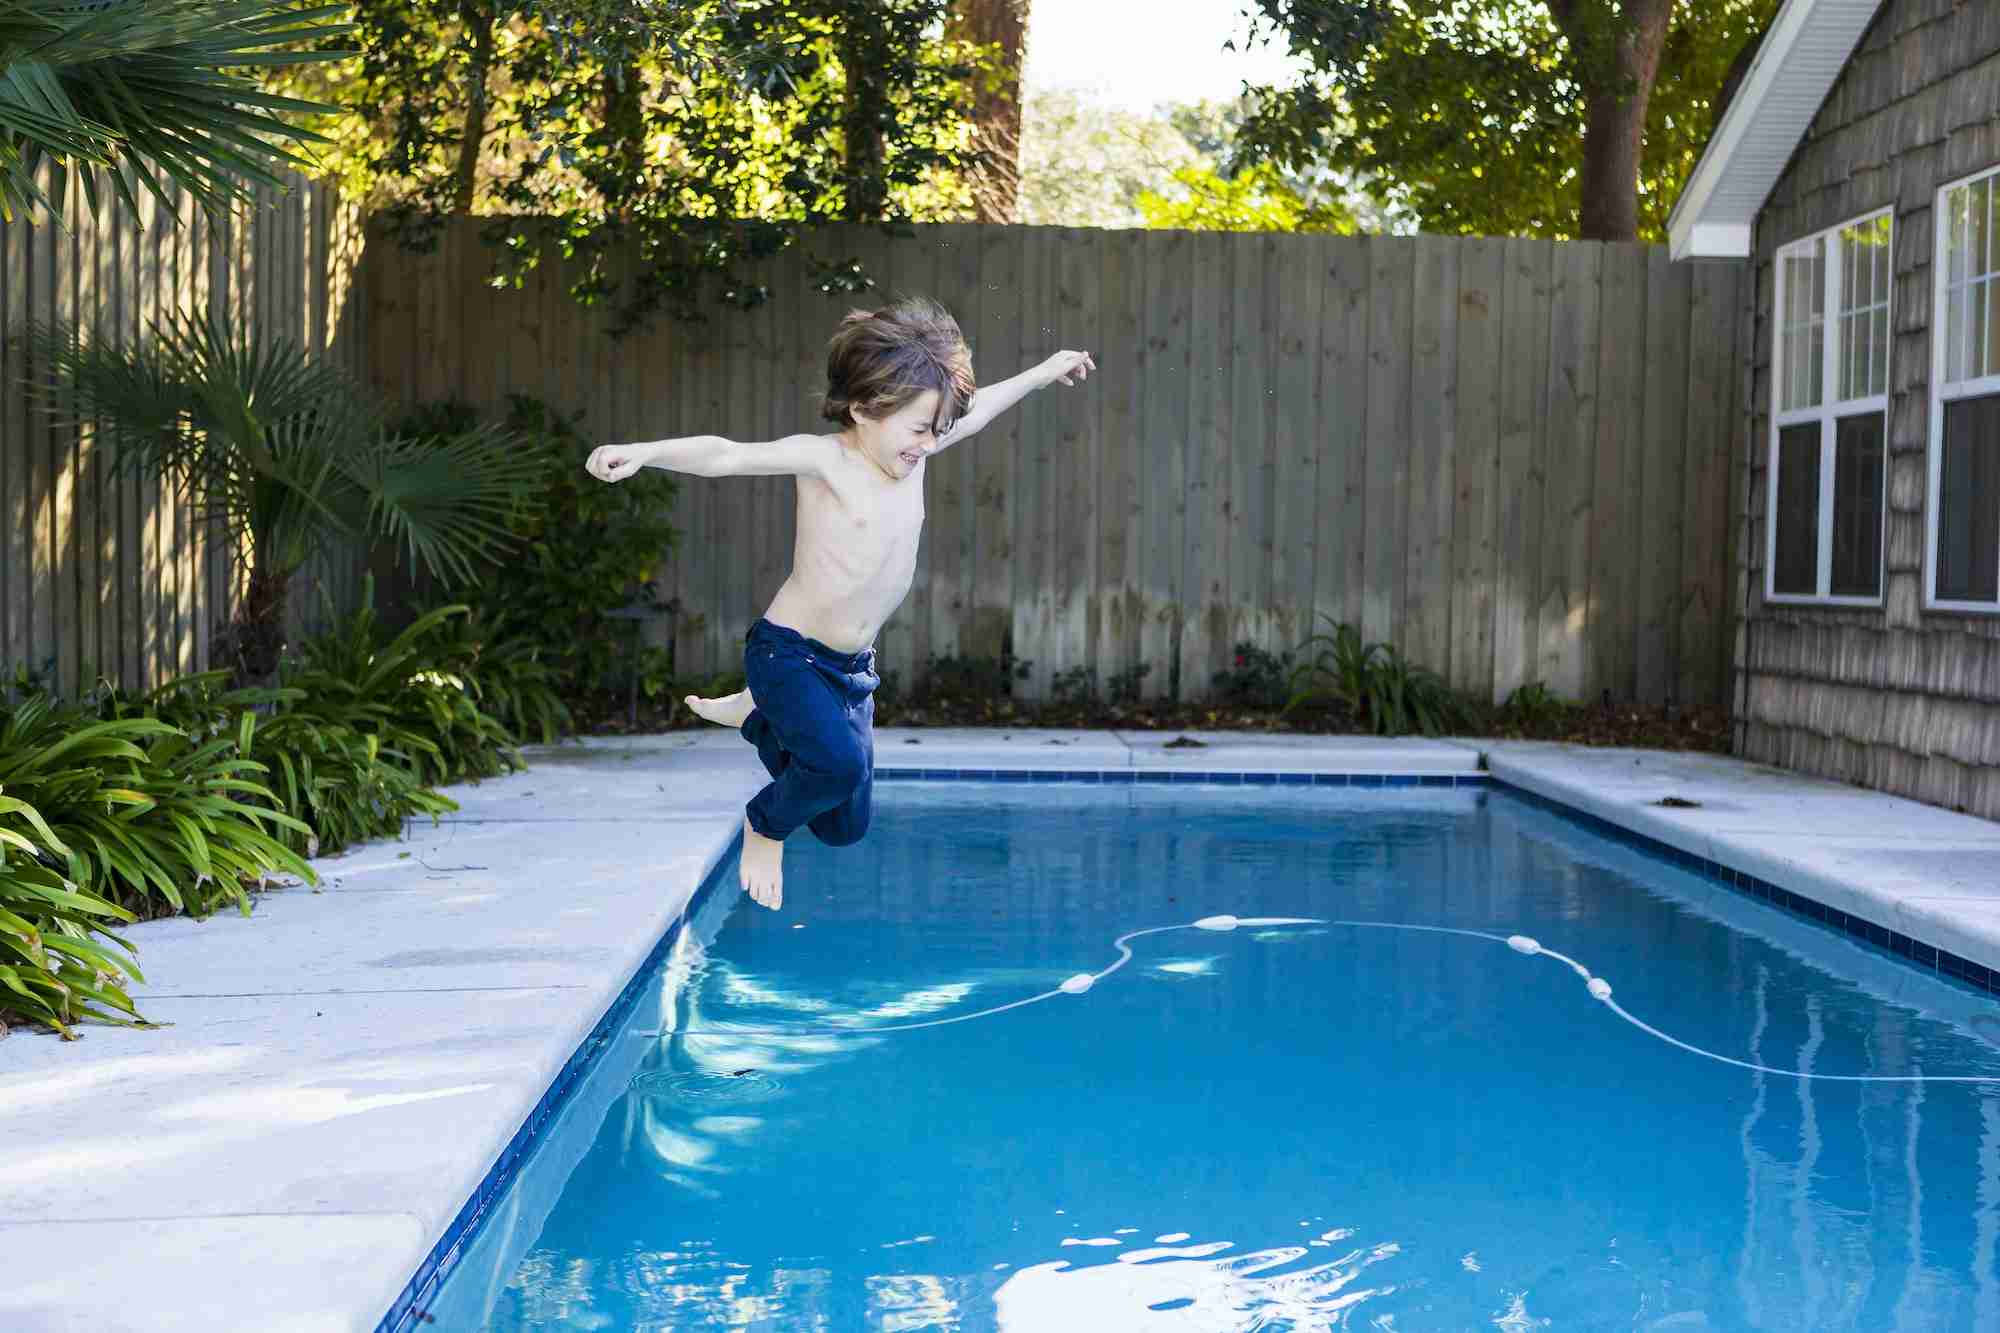 A six year old boy leaping into a swimming pool